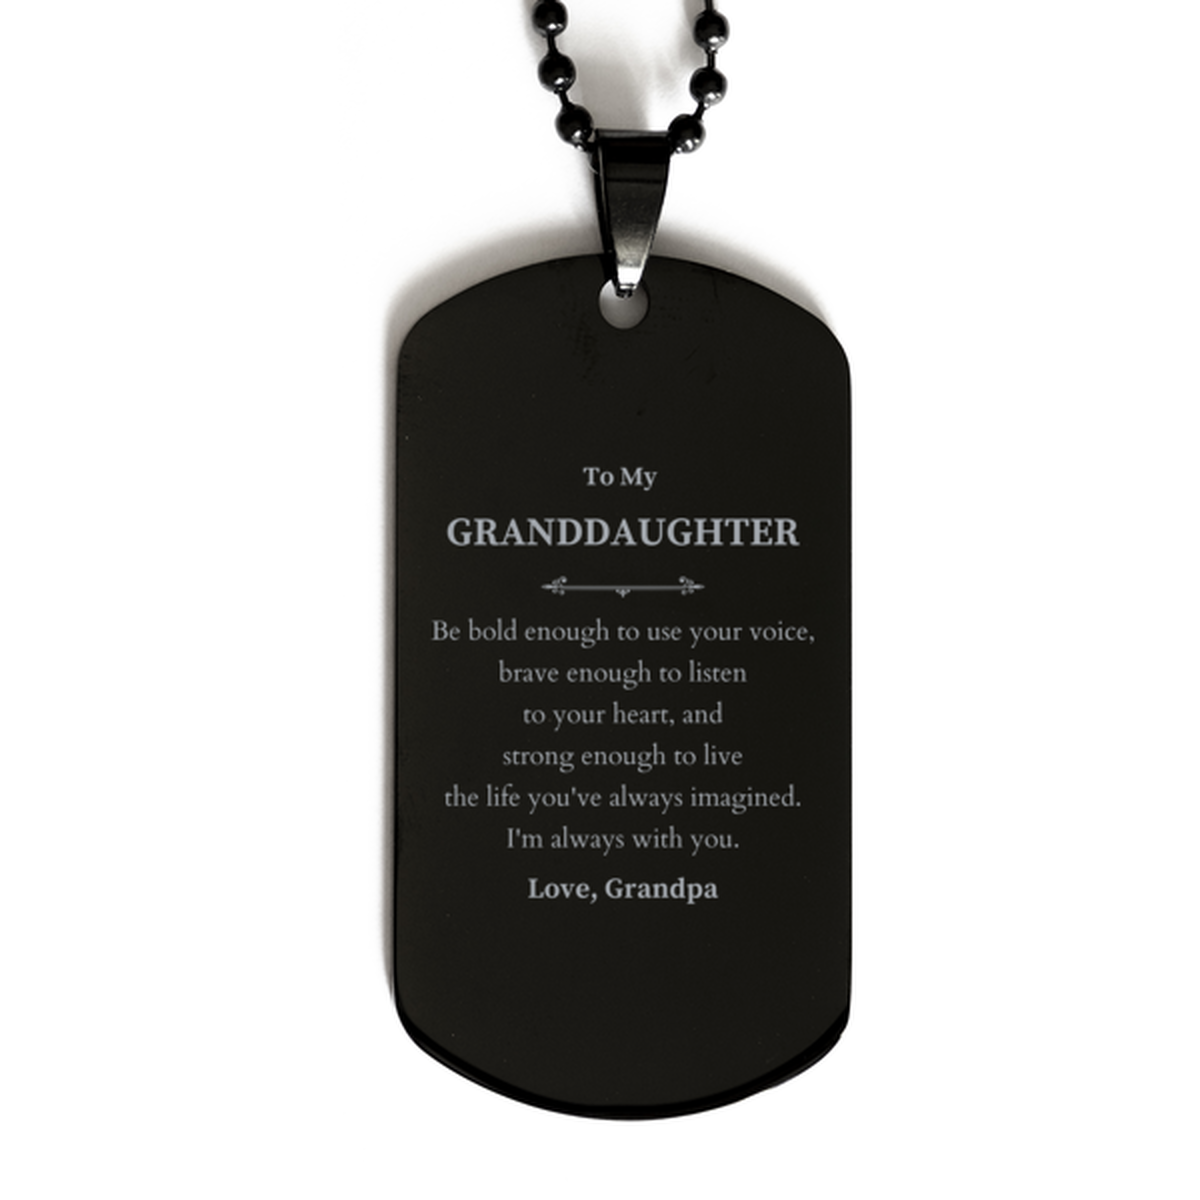 Keepsake Granddaughter Black Dog Tag Gift Idea Graduation Christmas Birthday Granddaughter from Grandpa, Granddaughter Be bold enough to use your voice, brave enough to listen to your heart. Love, Grandpa